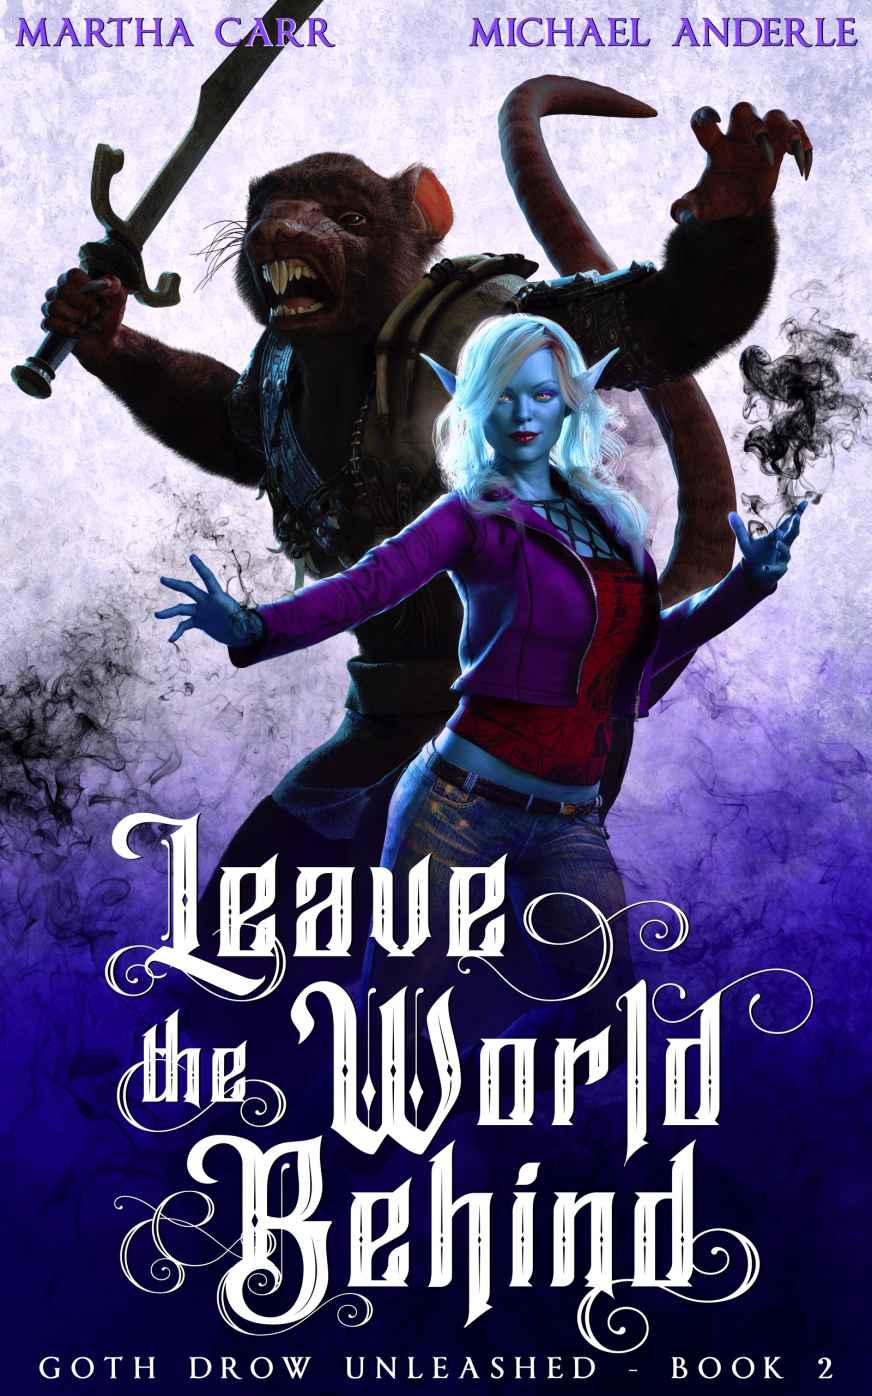 Leave The World Behind (Goth Drow Unleashed Book 2)